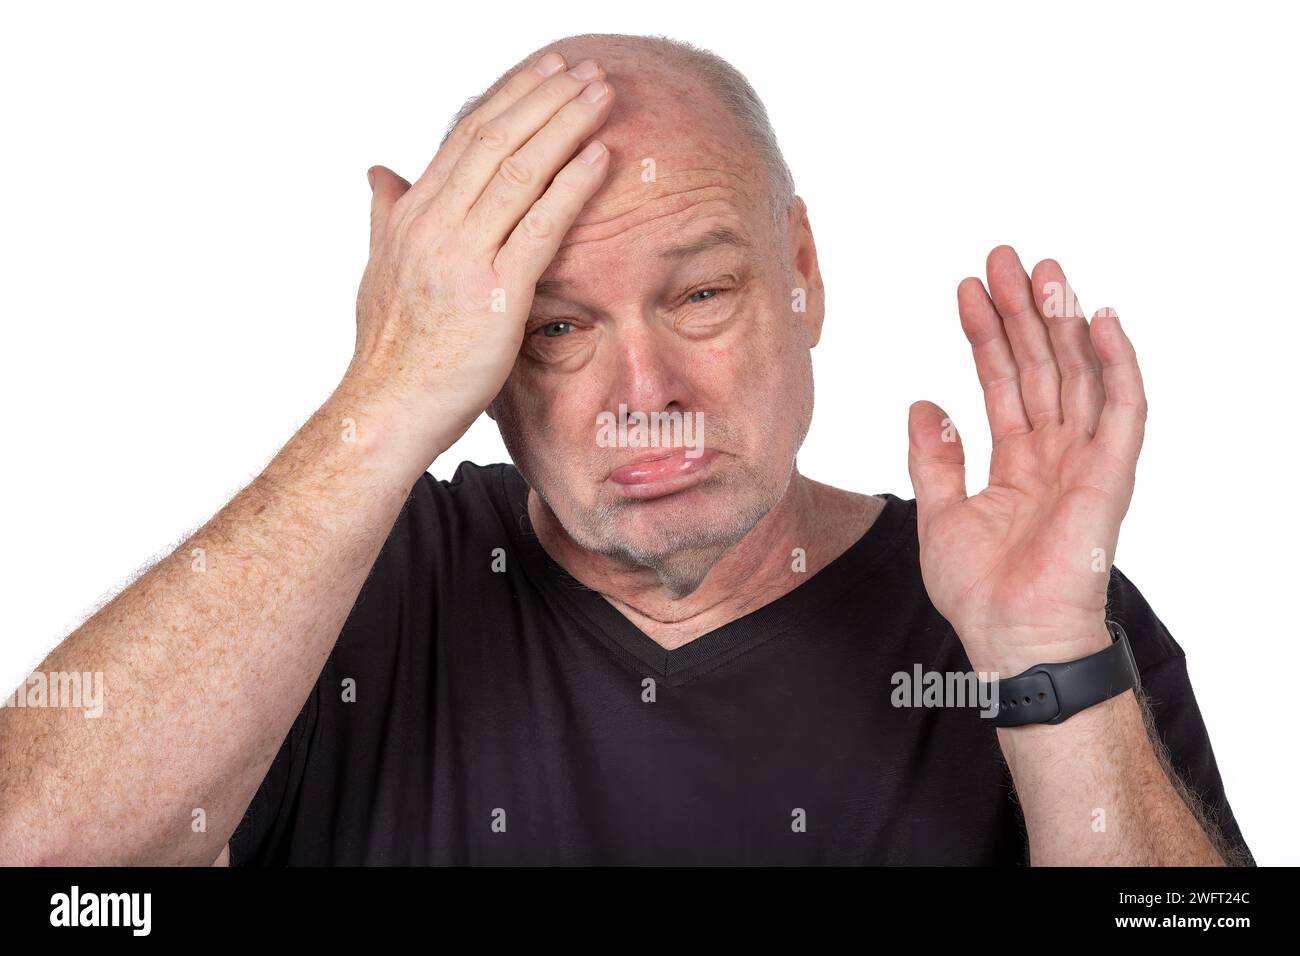 Middle Age Man Expressing Pain and Stress, Portrait in Black T-Shirt, Coping with Emotional Distress on White Background - Mental Health Concept Stock Photo